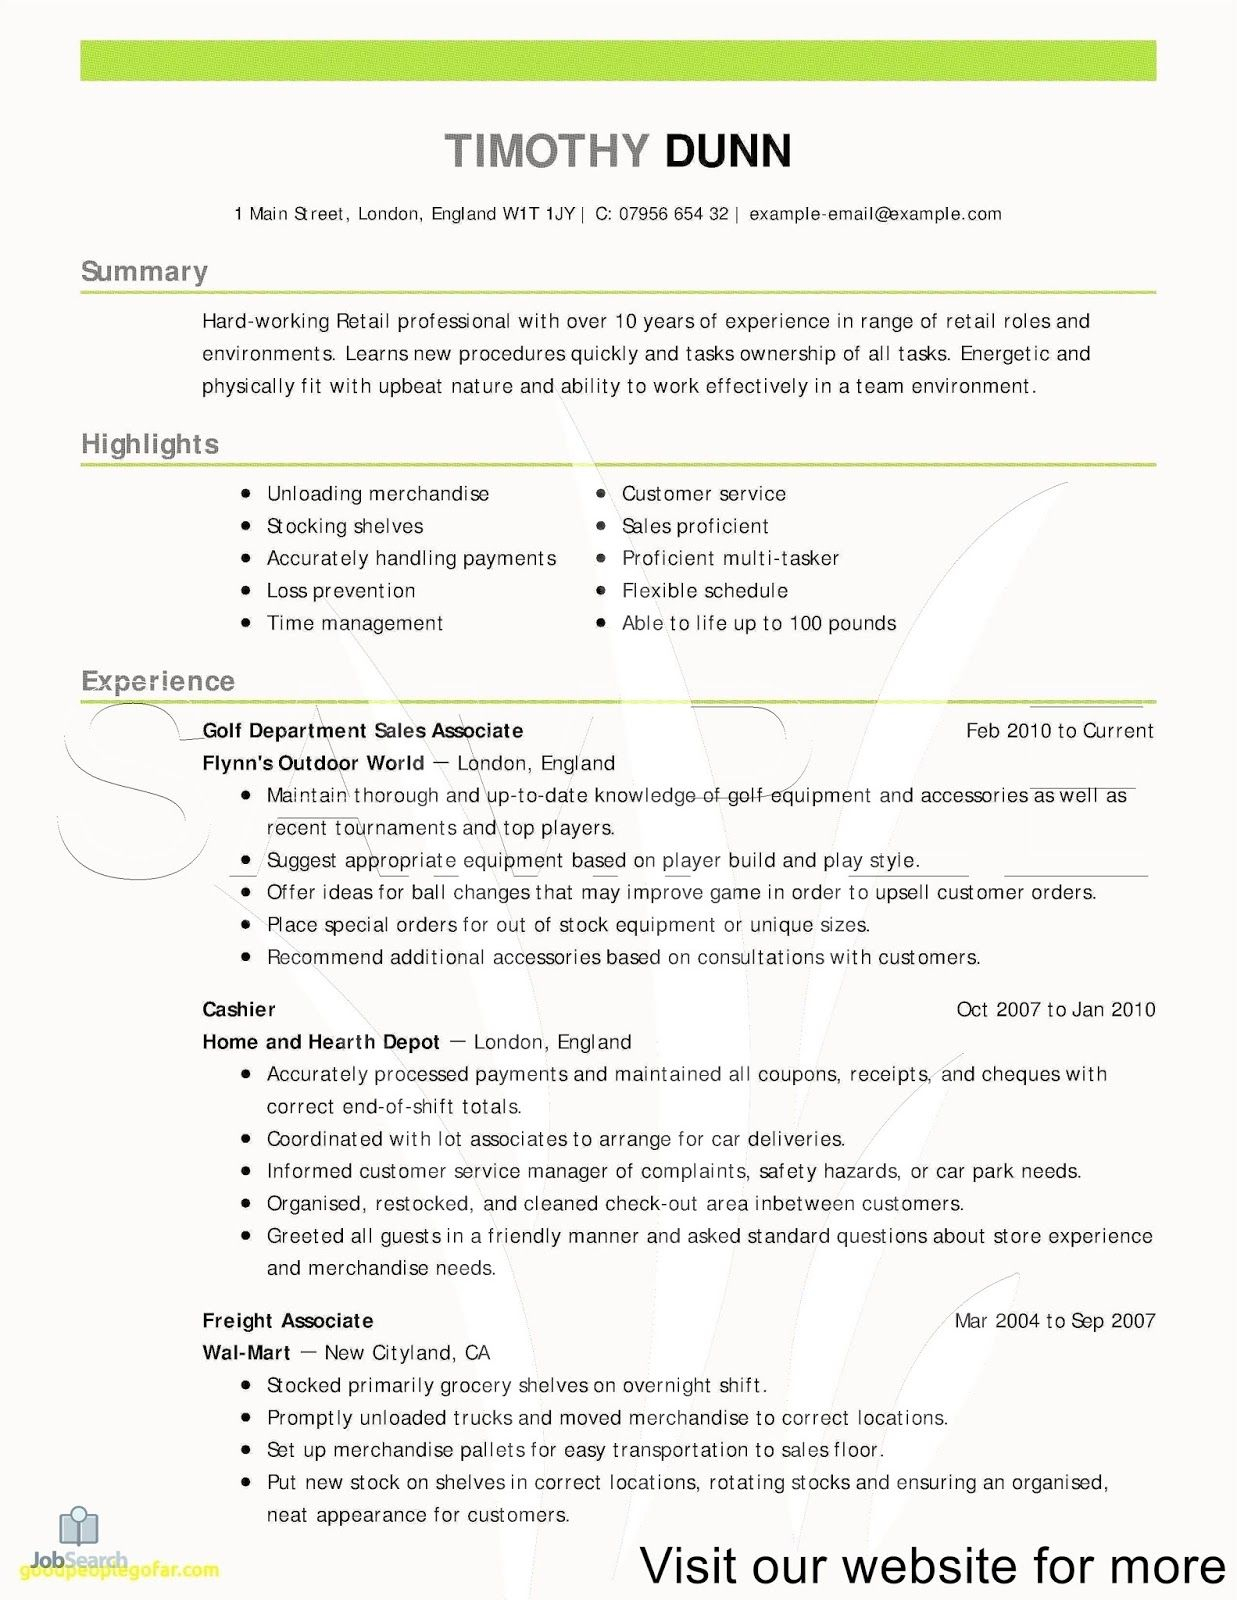 Sample Child Care Resume Objectives Australia 2020 In 2020 throughout dimensions 1237 X 1600